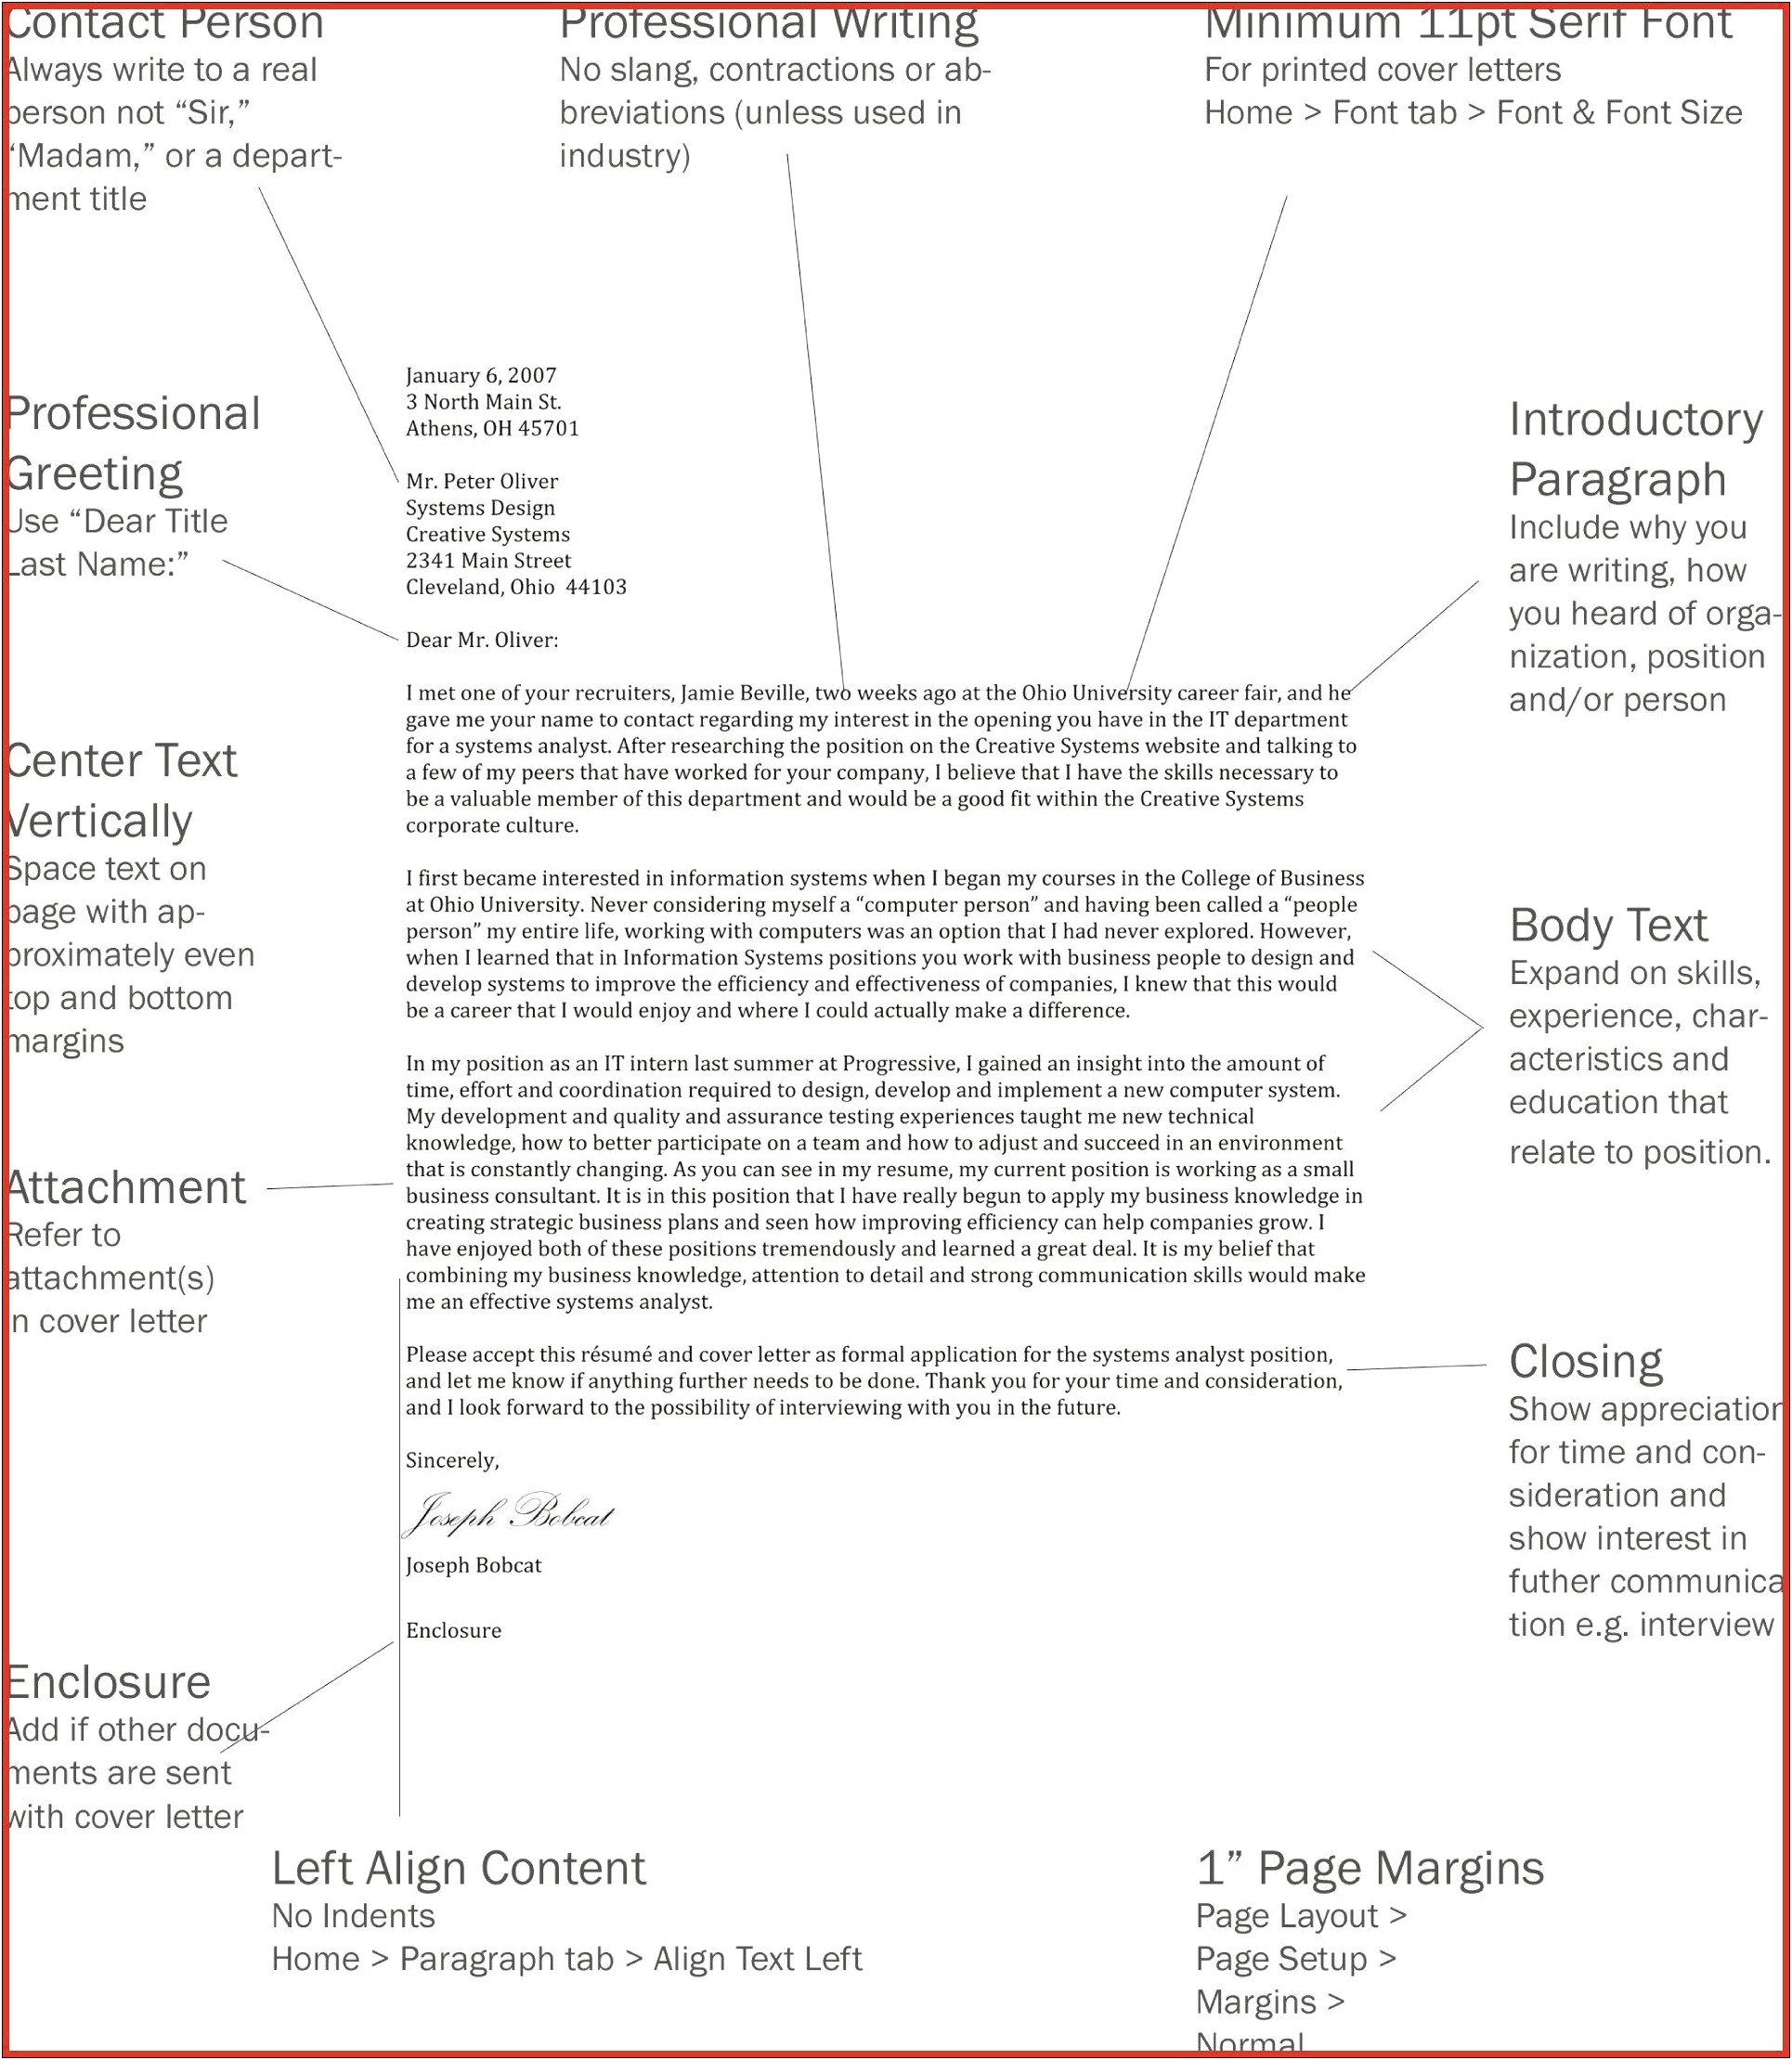 Margins For Cover Letter And Resume